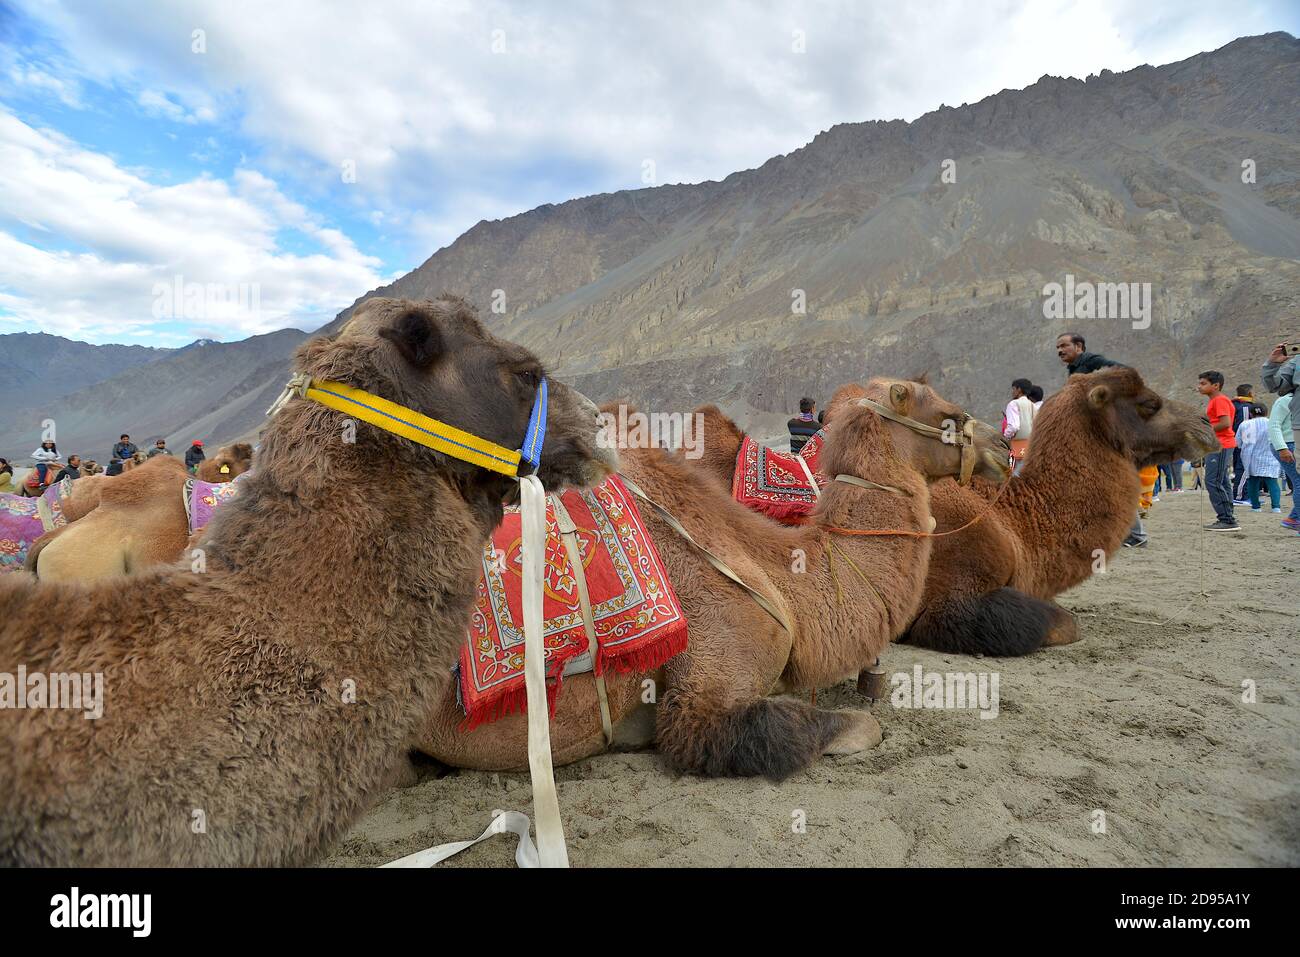 Bactrian (two-humped) camels in  Hunder, in the Nubra Valley, Ladakh. Stock Photo